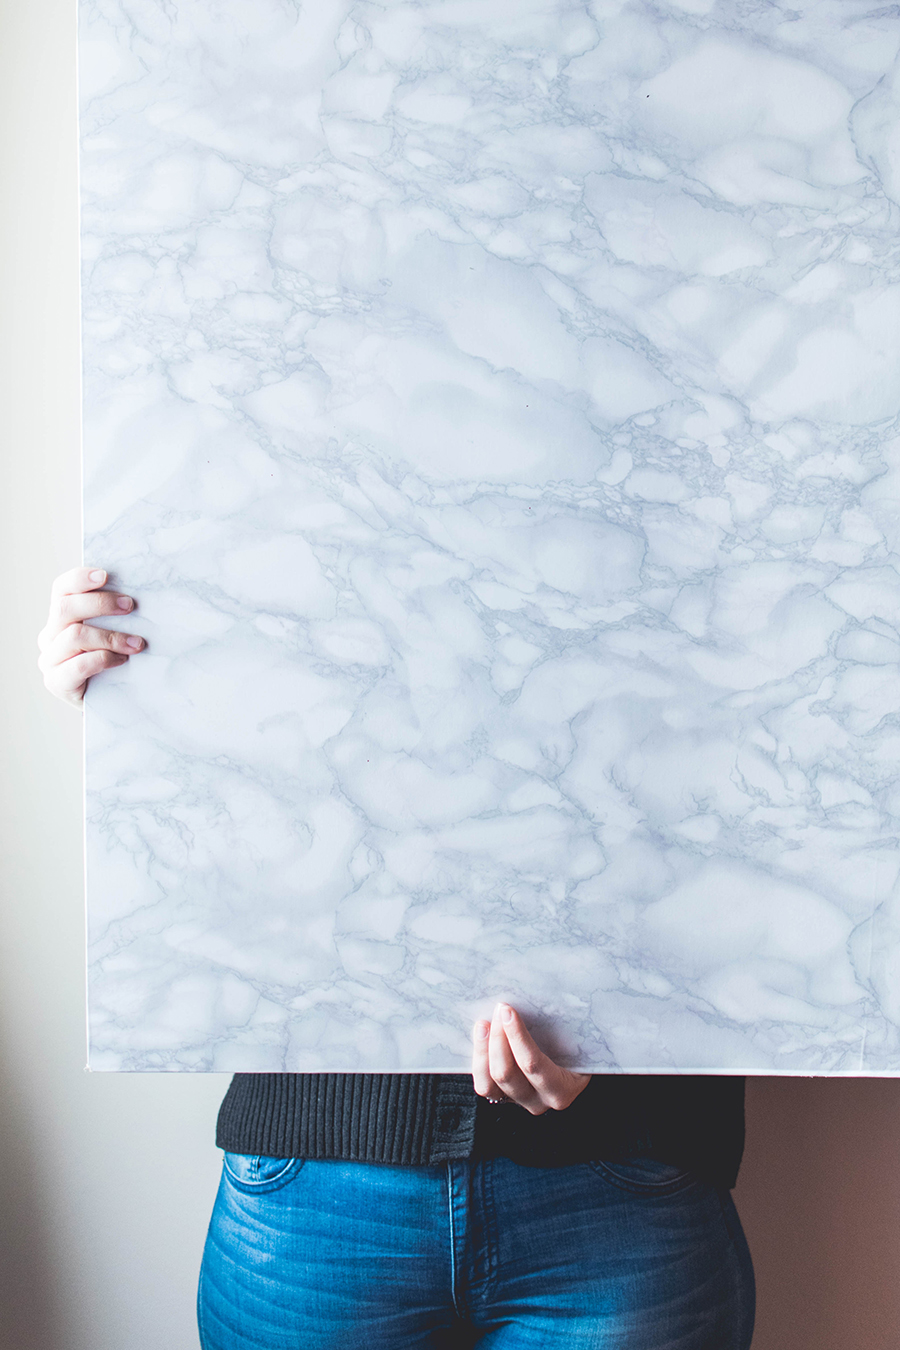 Make this marble DIY photography background